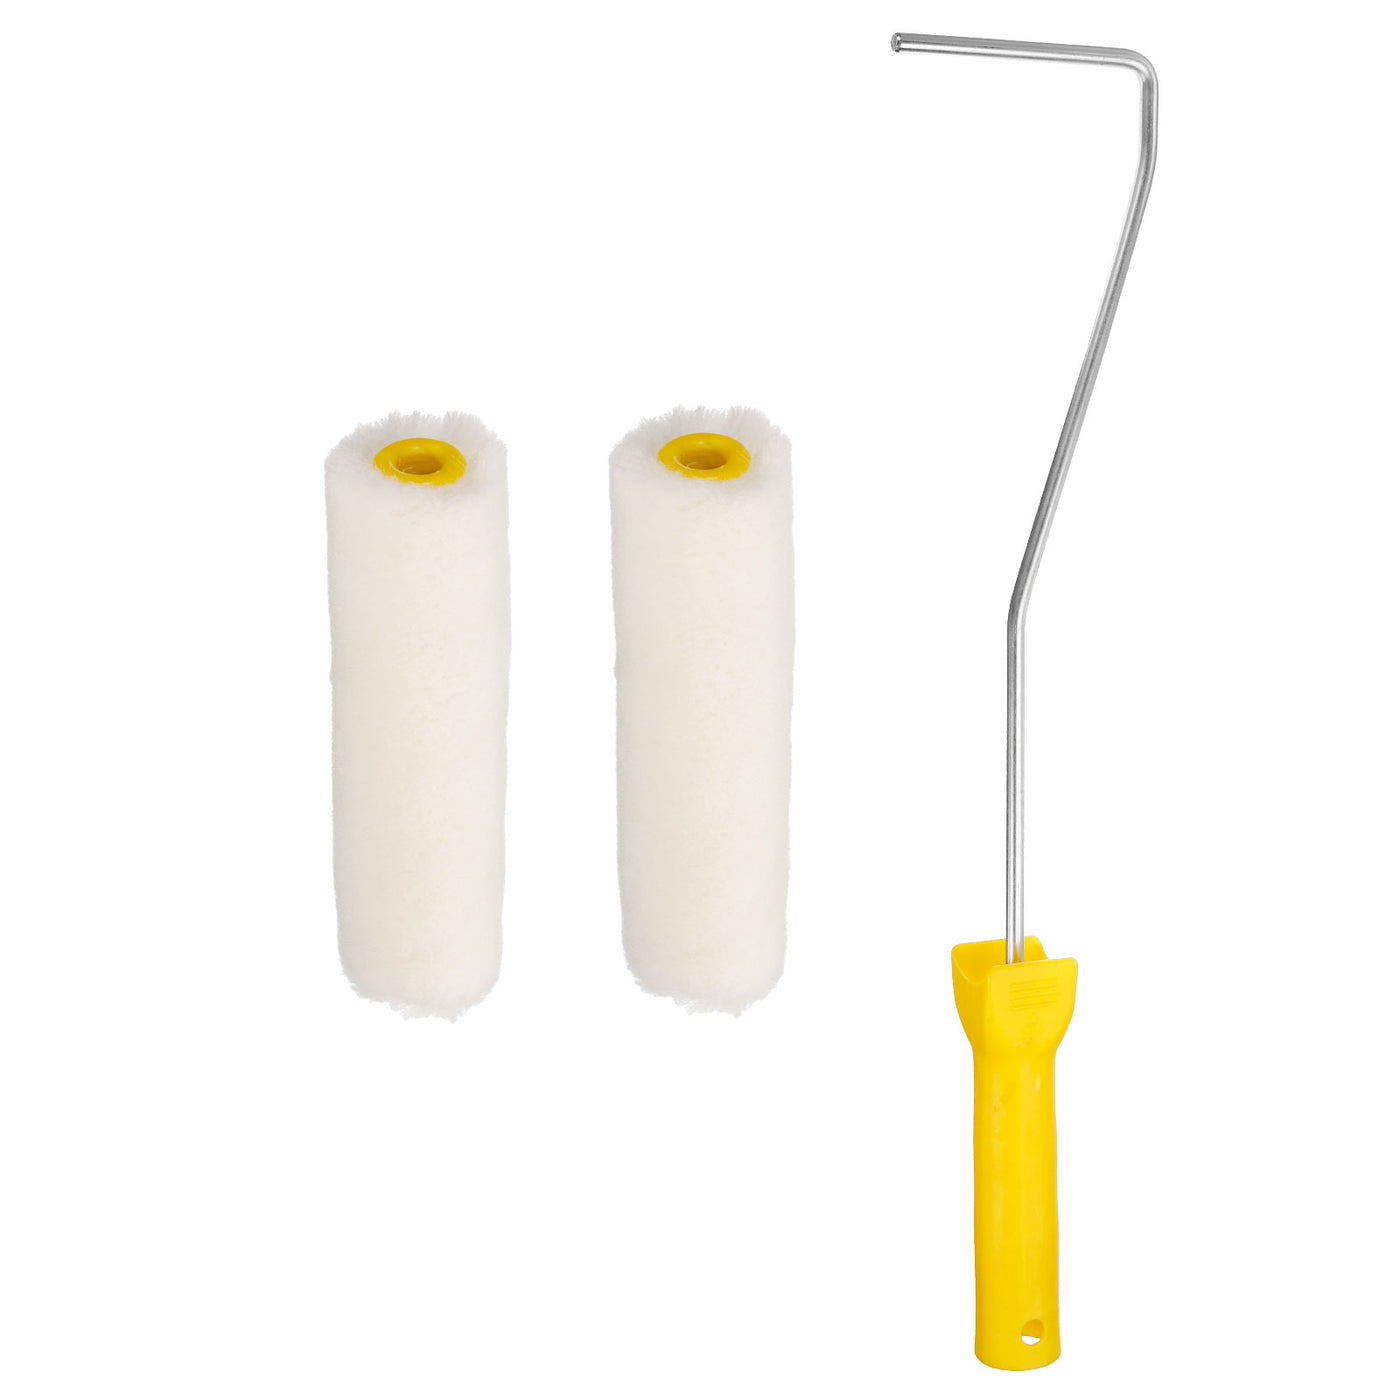 uxcell Uxcell 3Pcs Paint Roller Kit, 2Pcs 7mm Thickness 4" Wool Roller Covers and 16" Frame